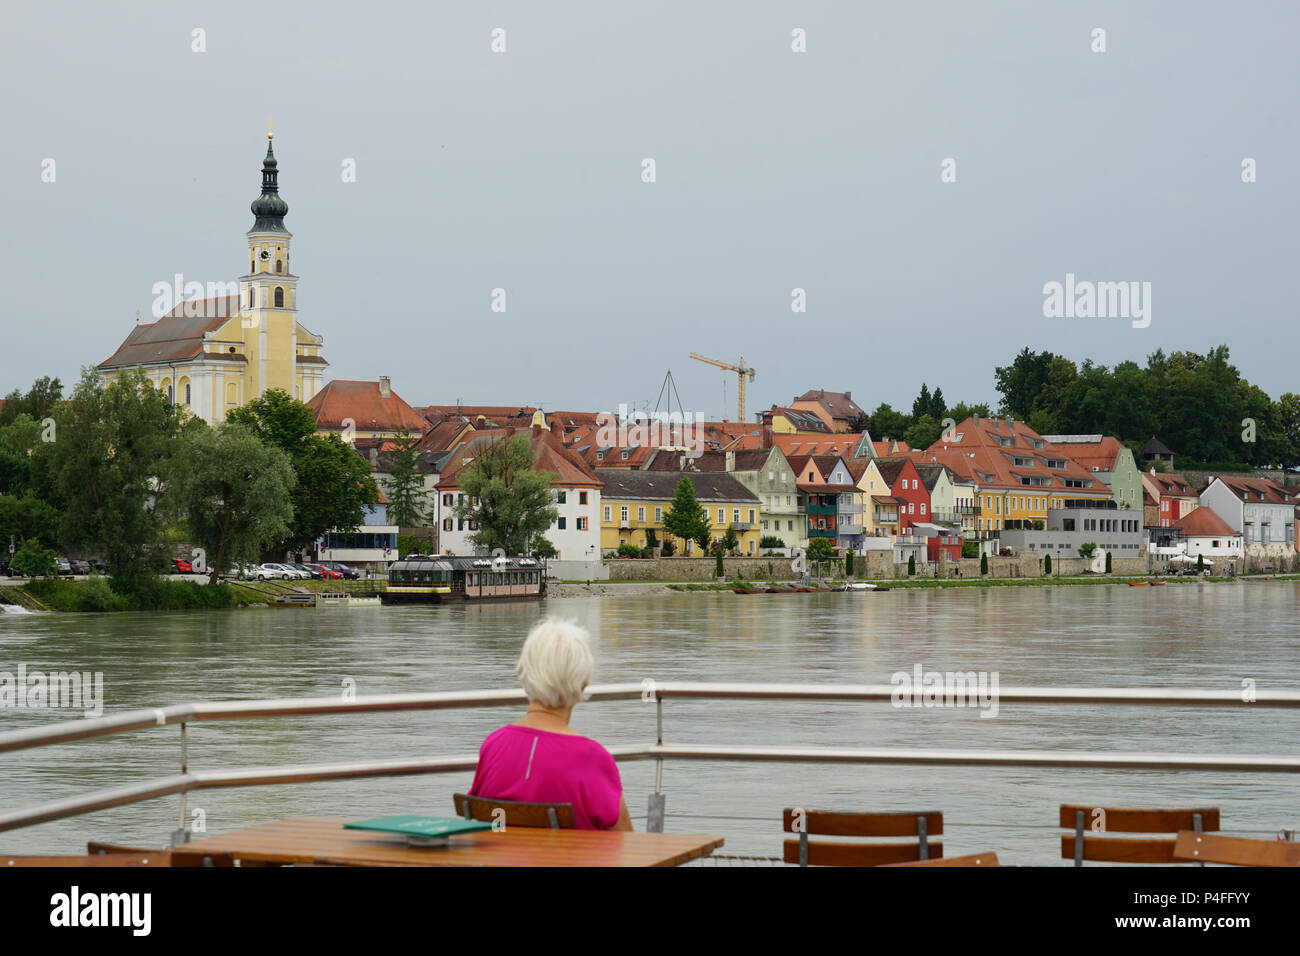 Boat Trip from Schärding to Passau on the River Inn, View to Schärding, Austria, Europe Stock Photo